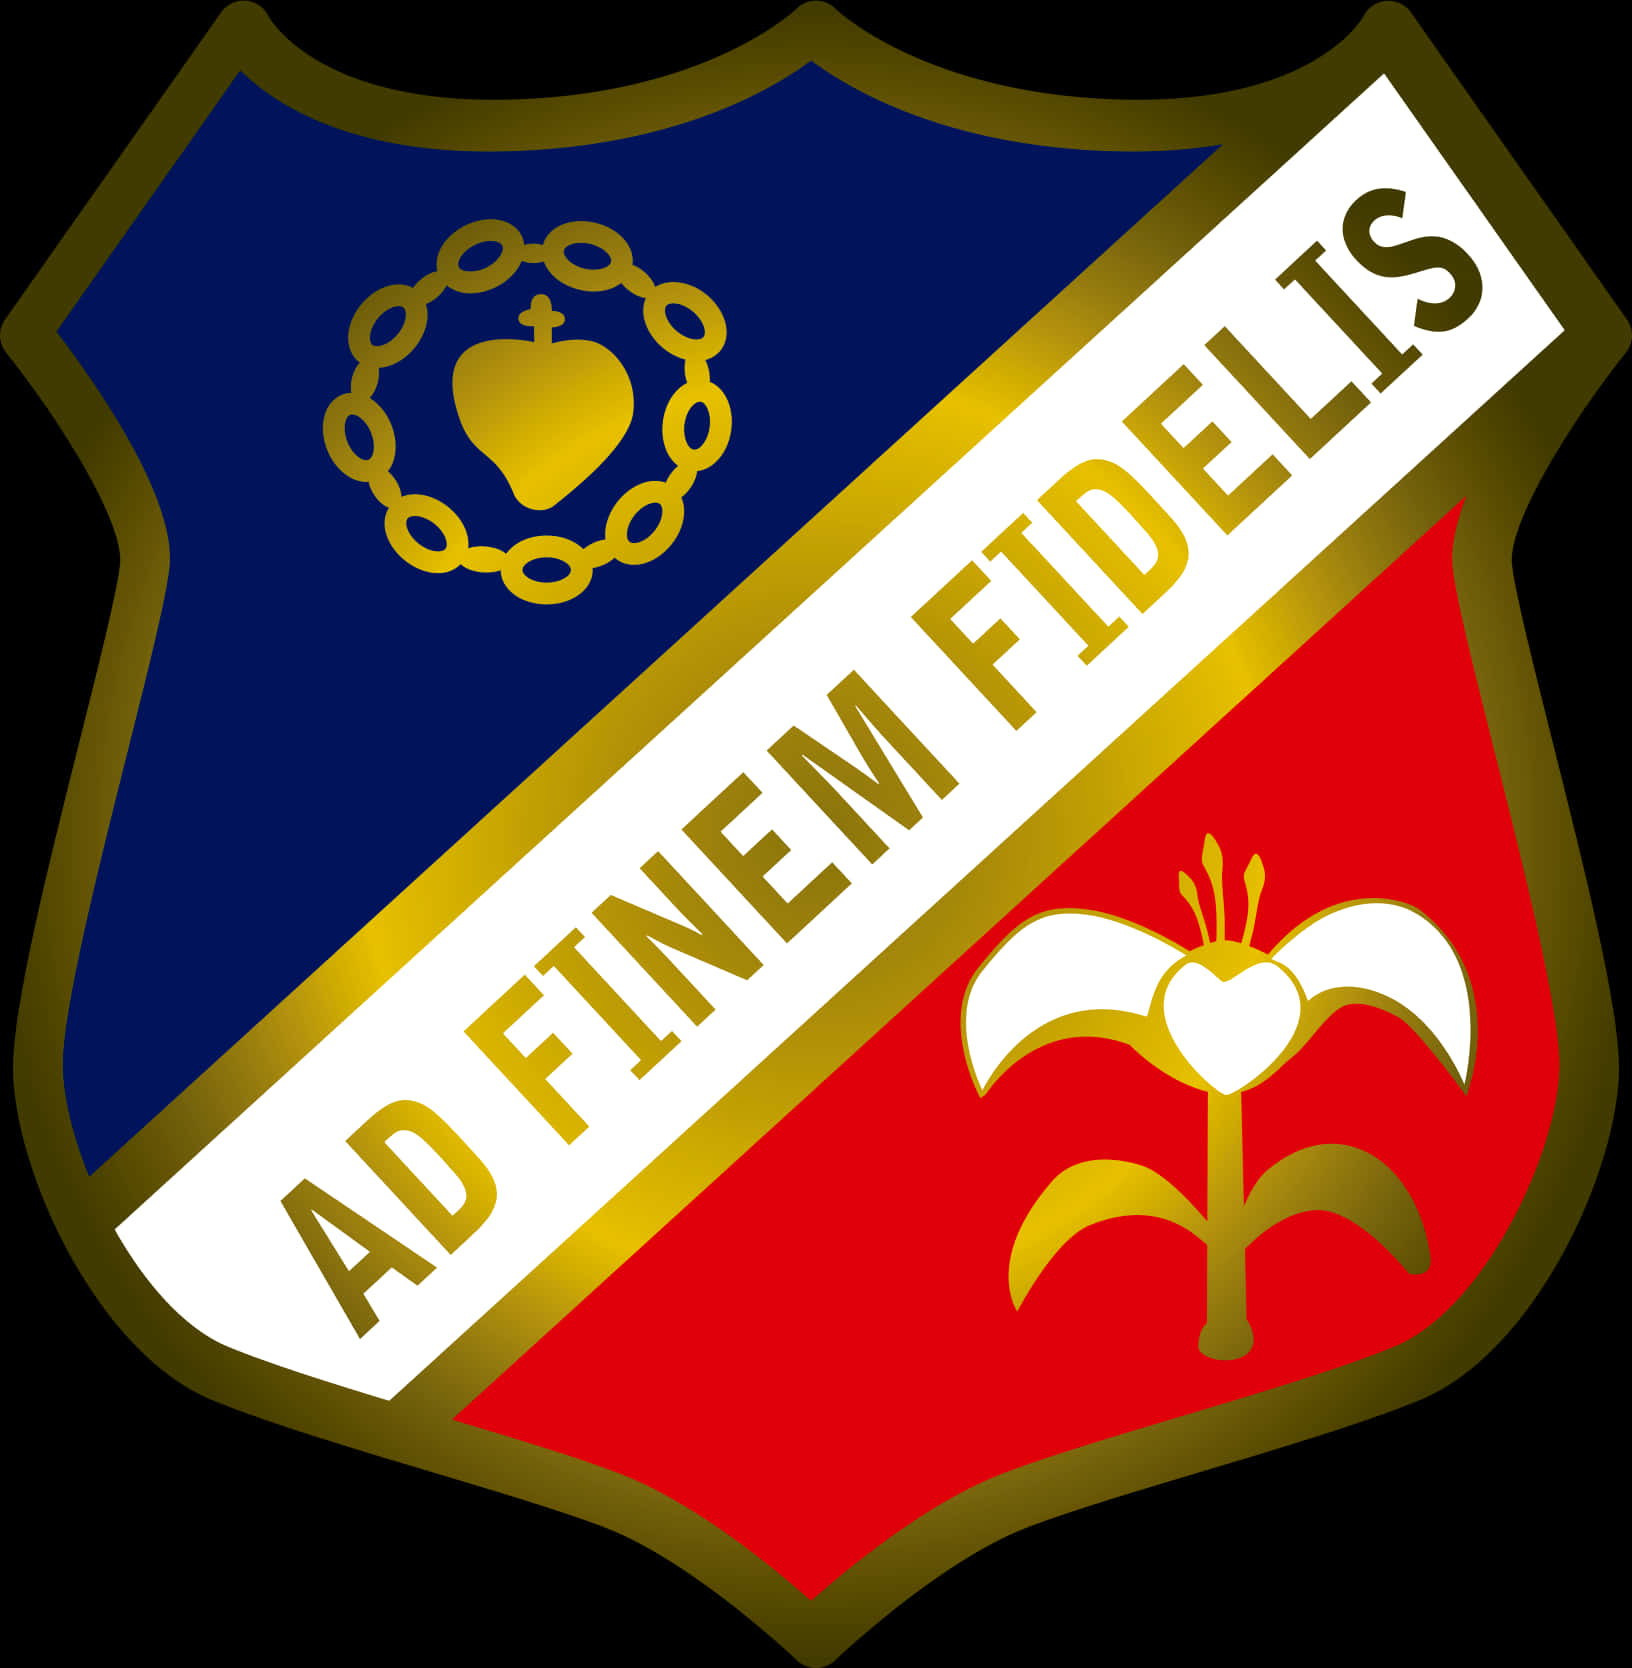 A Blue And Red Shield With White Text